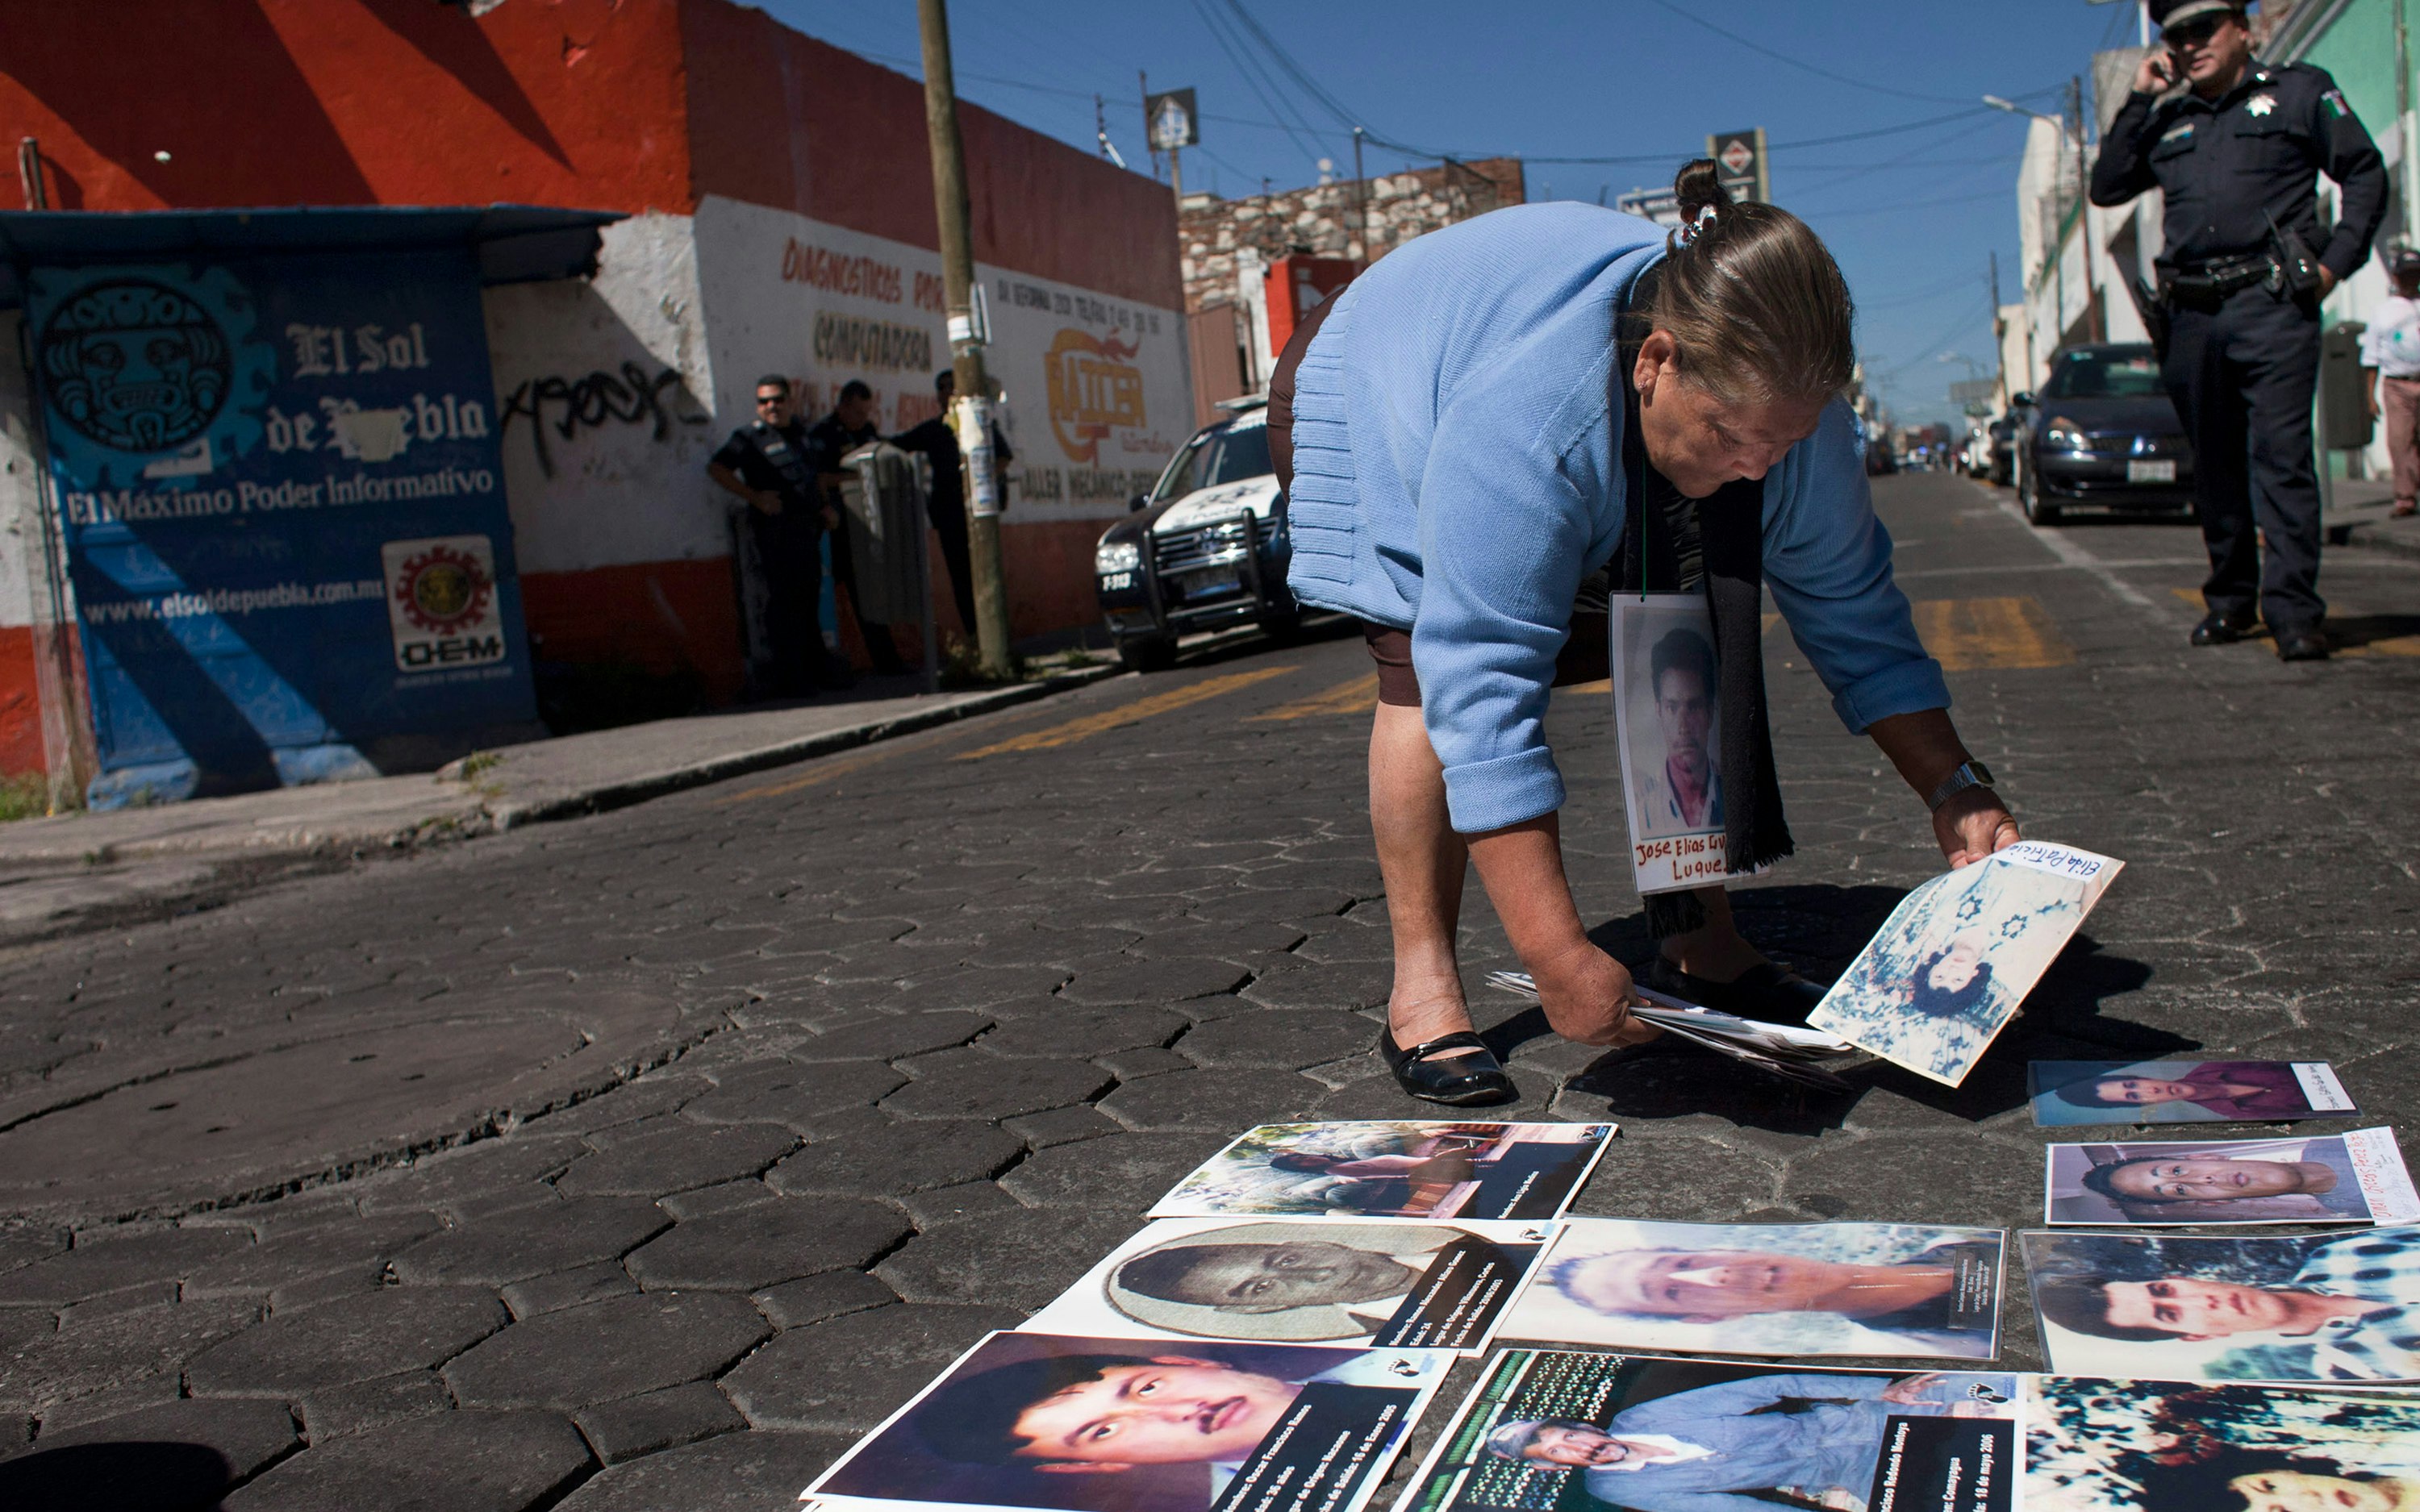 A woman placing photographs on a street